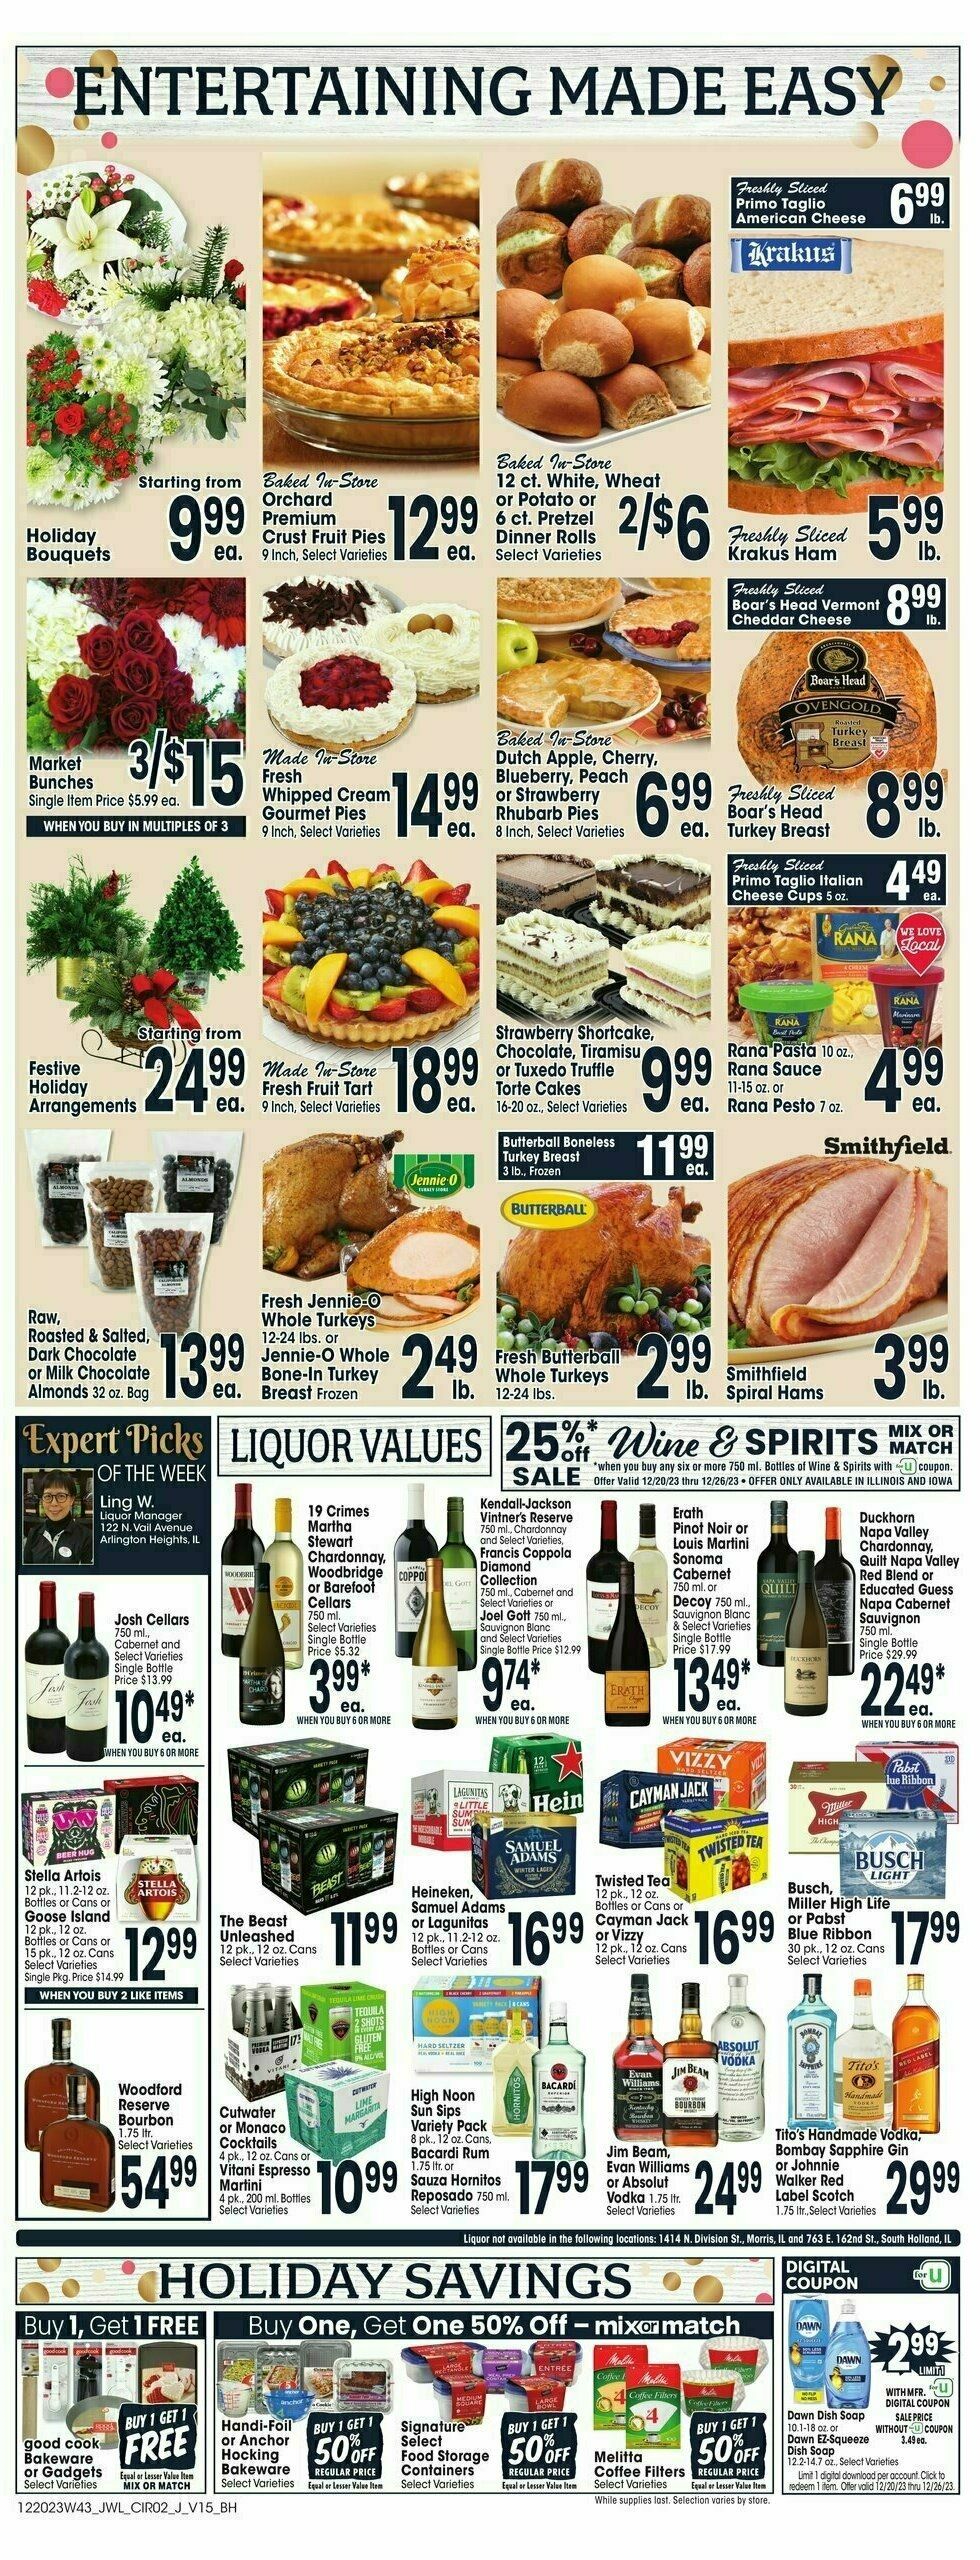 Jewel Osco Weekly Ad from December 20